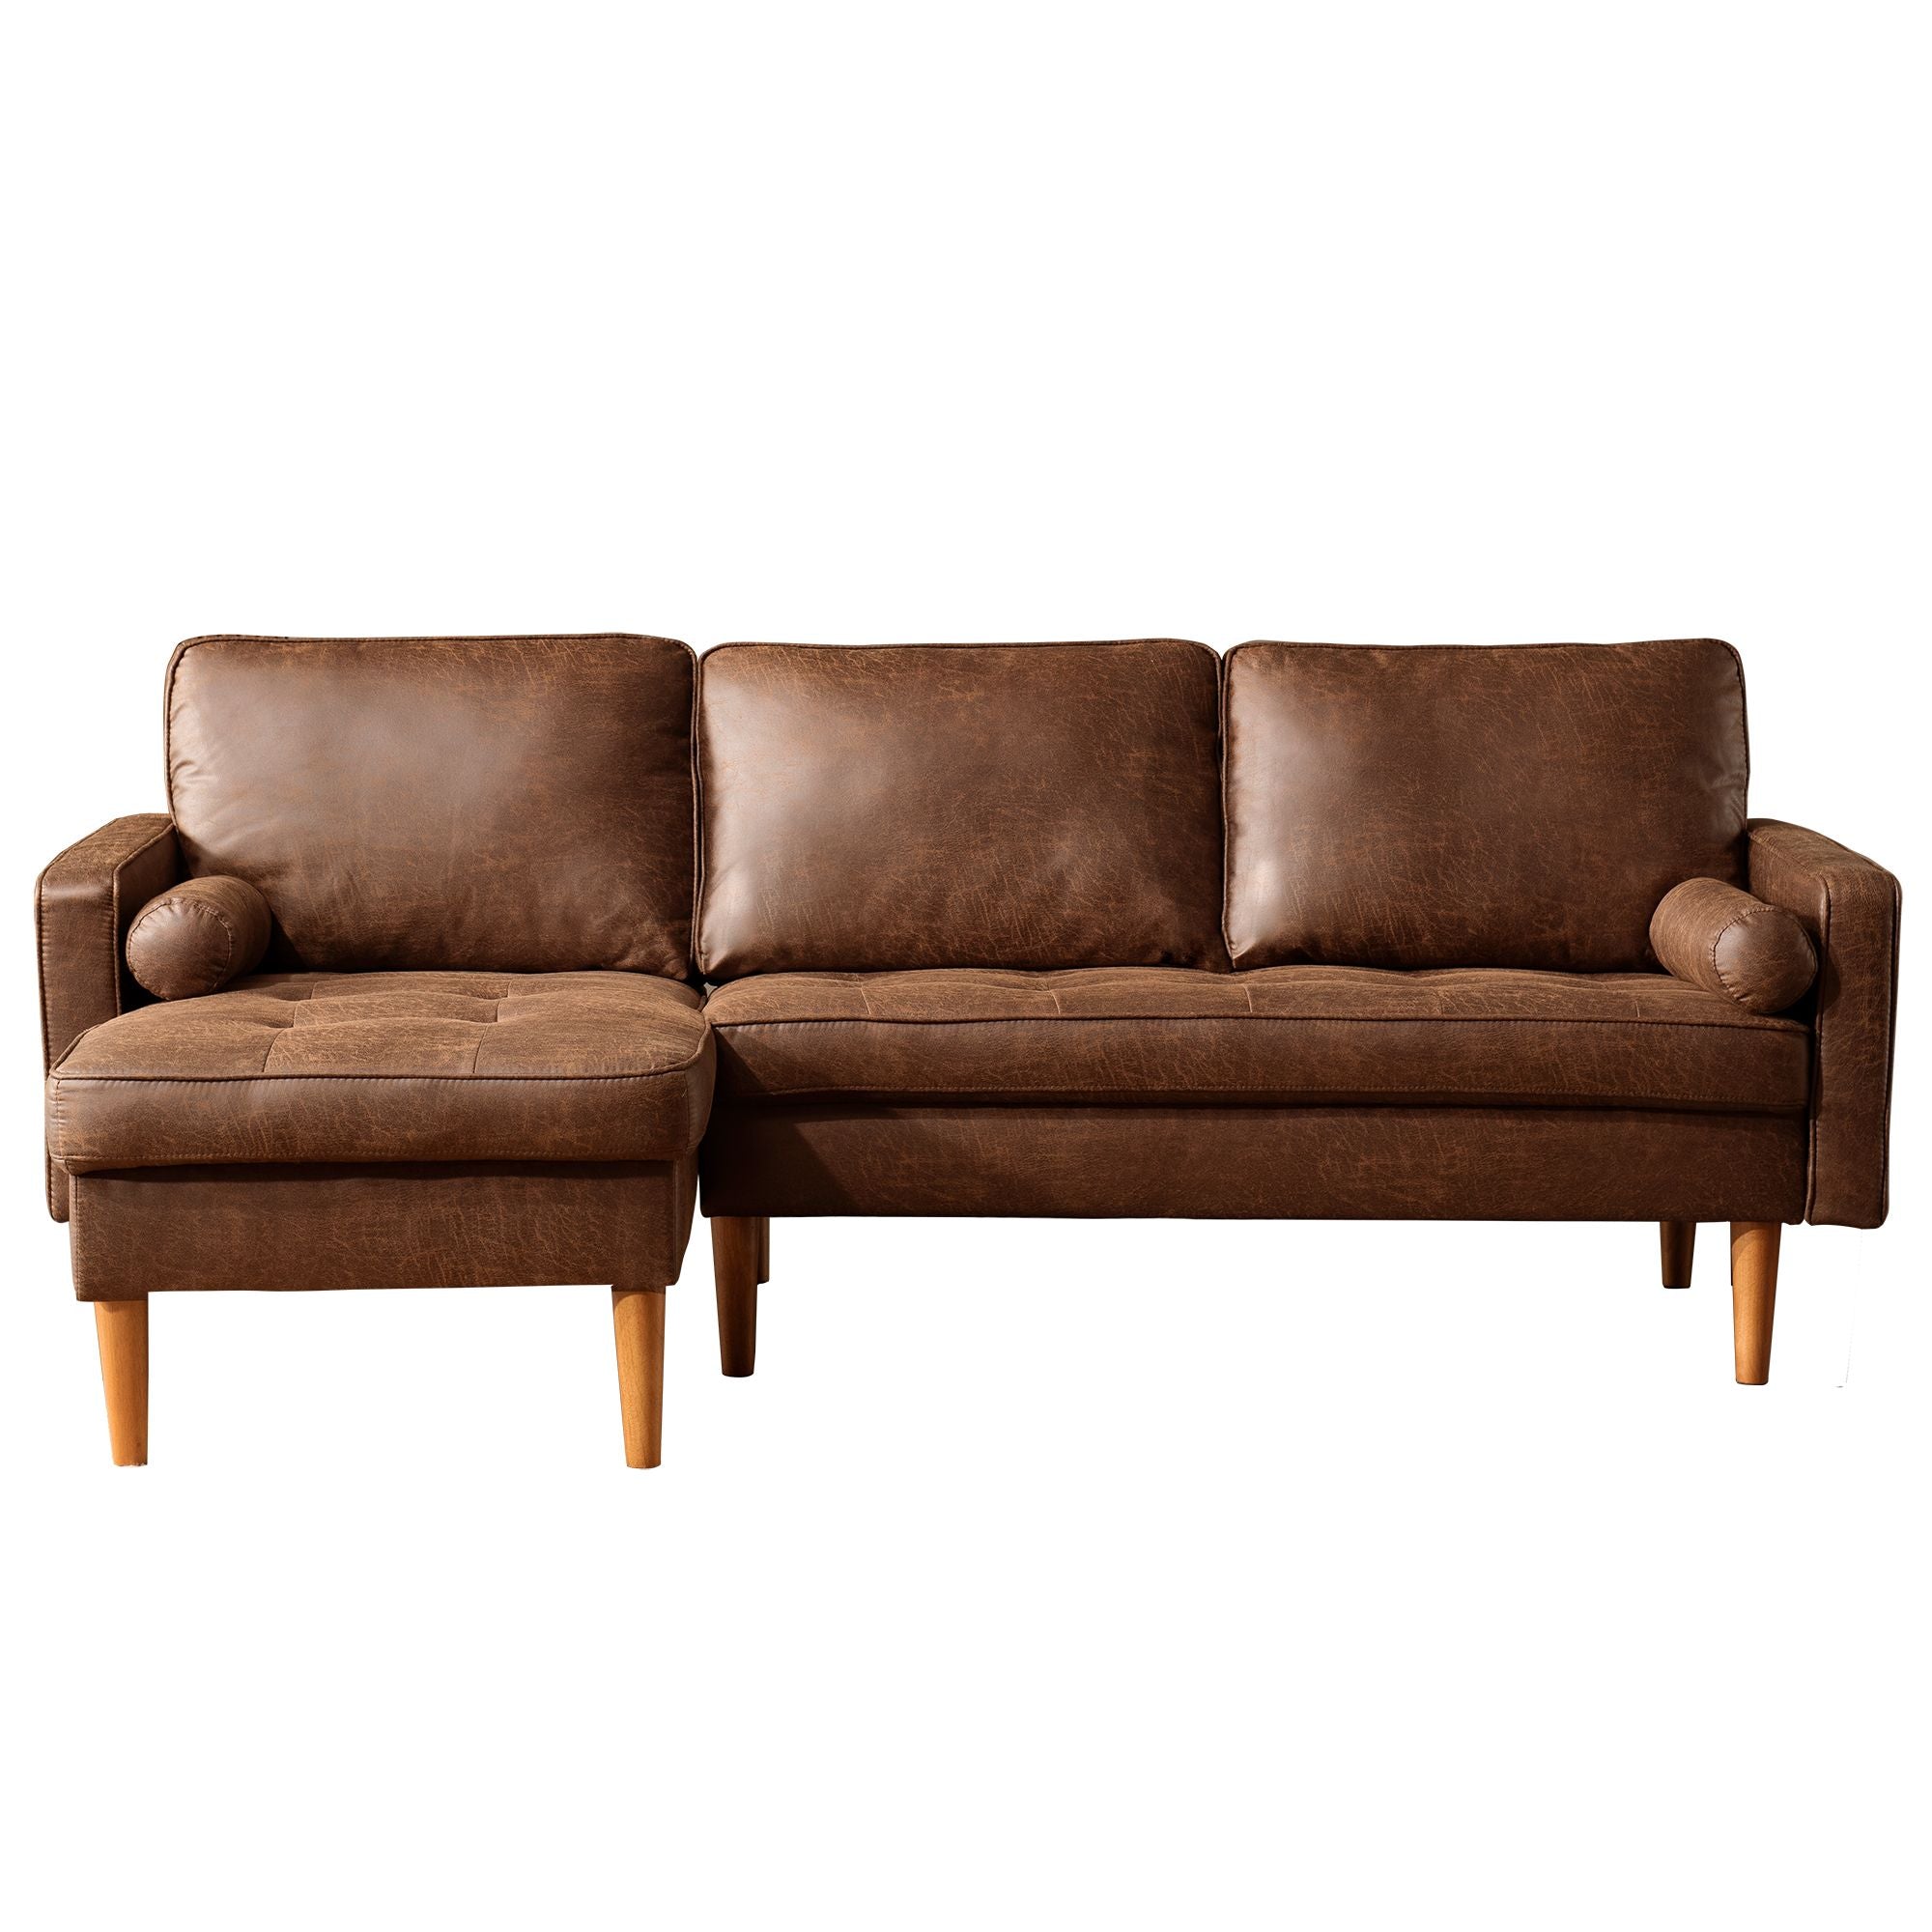 Ovios 83.07'' Mid Century Sectional Chaise Sofa, L-Shaped Couch